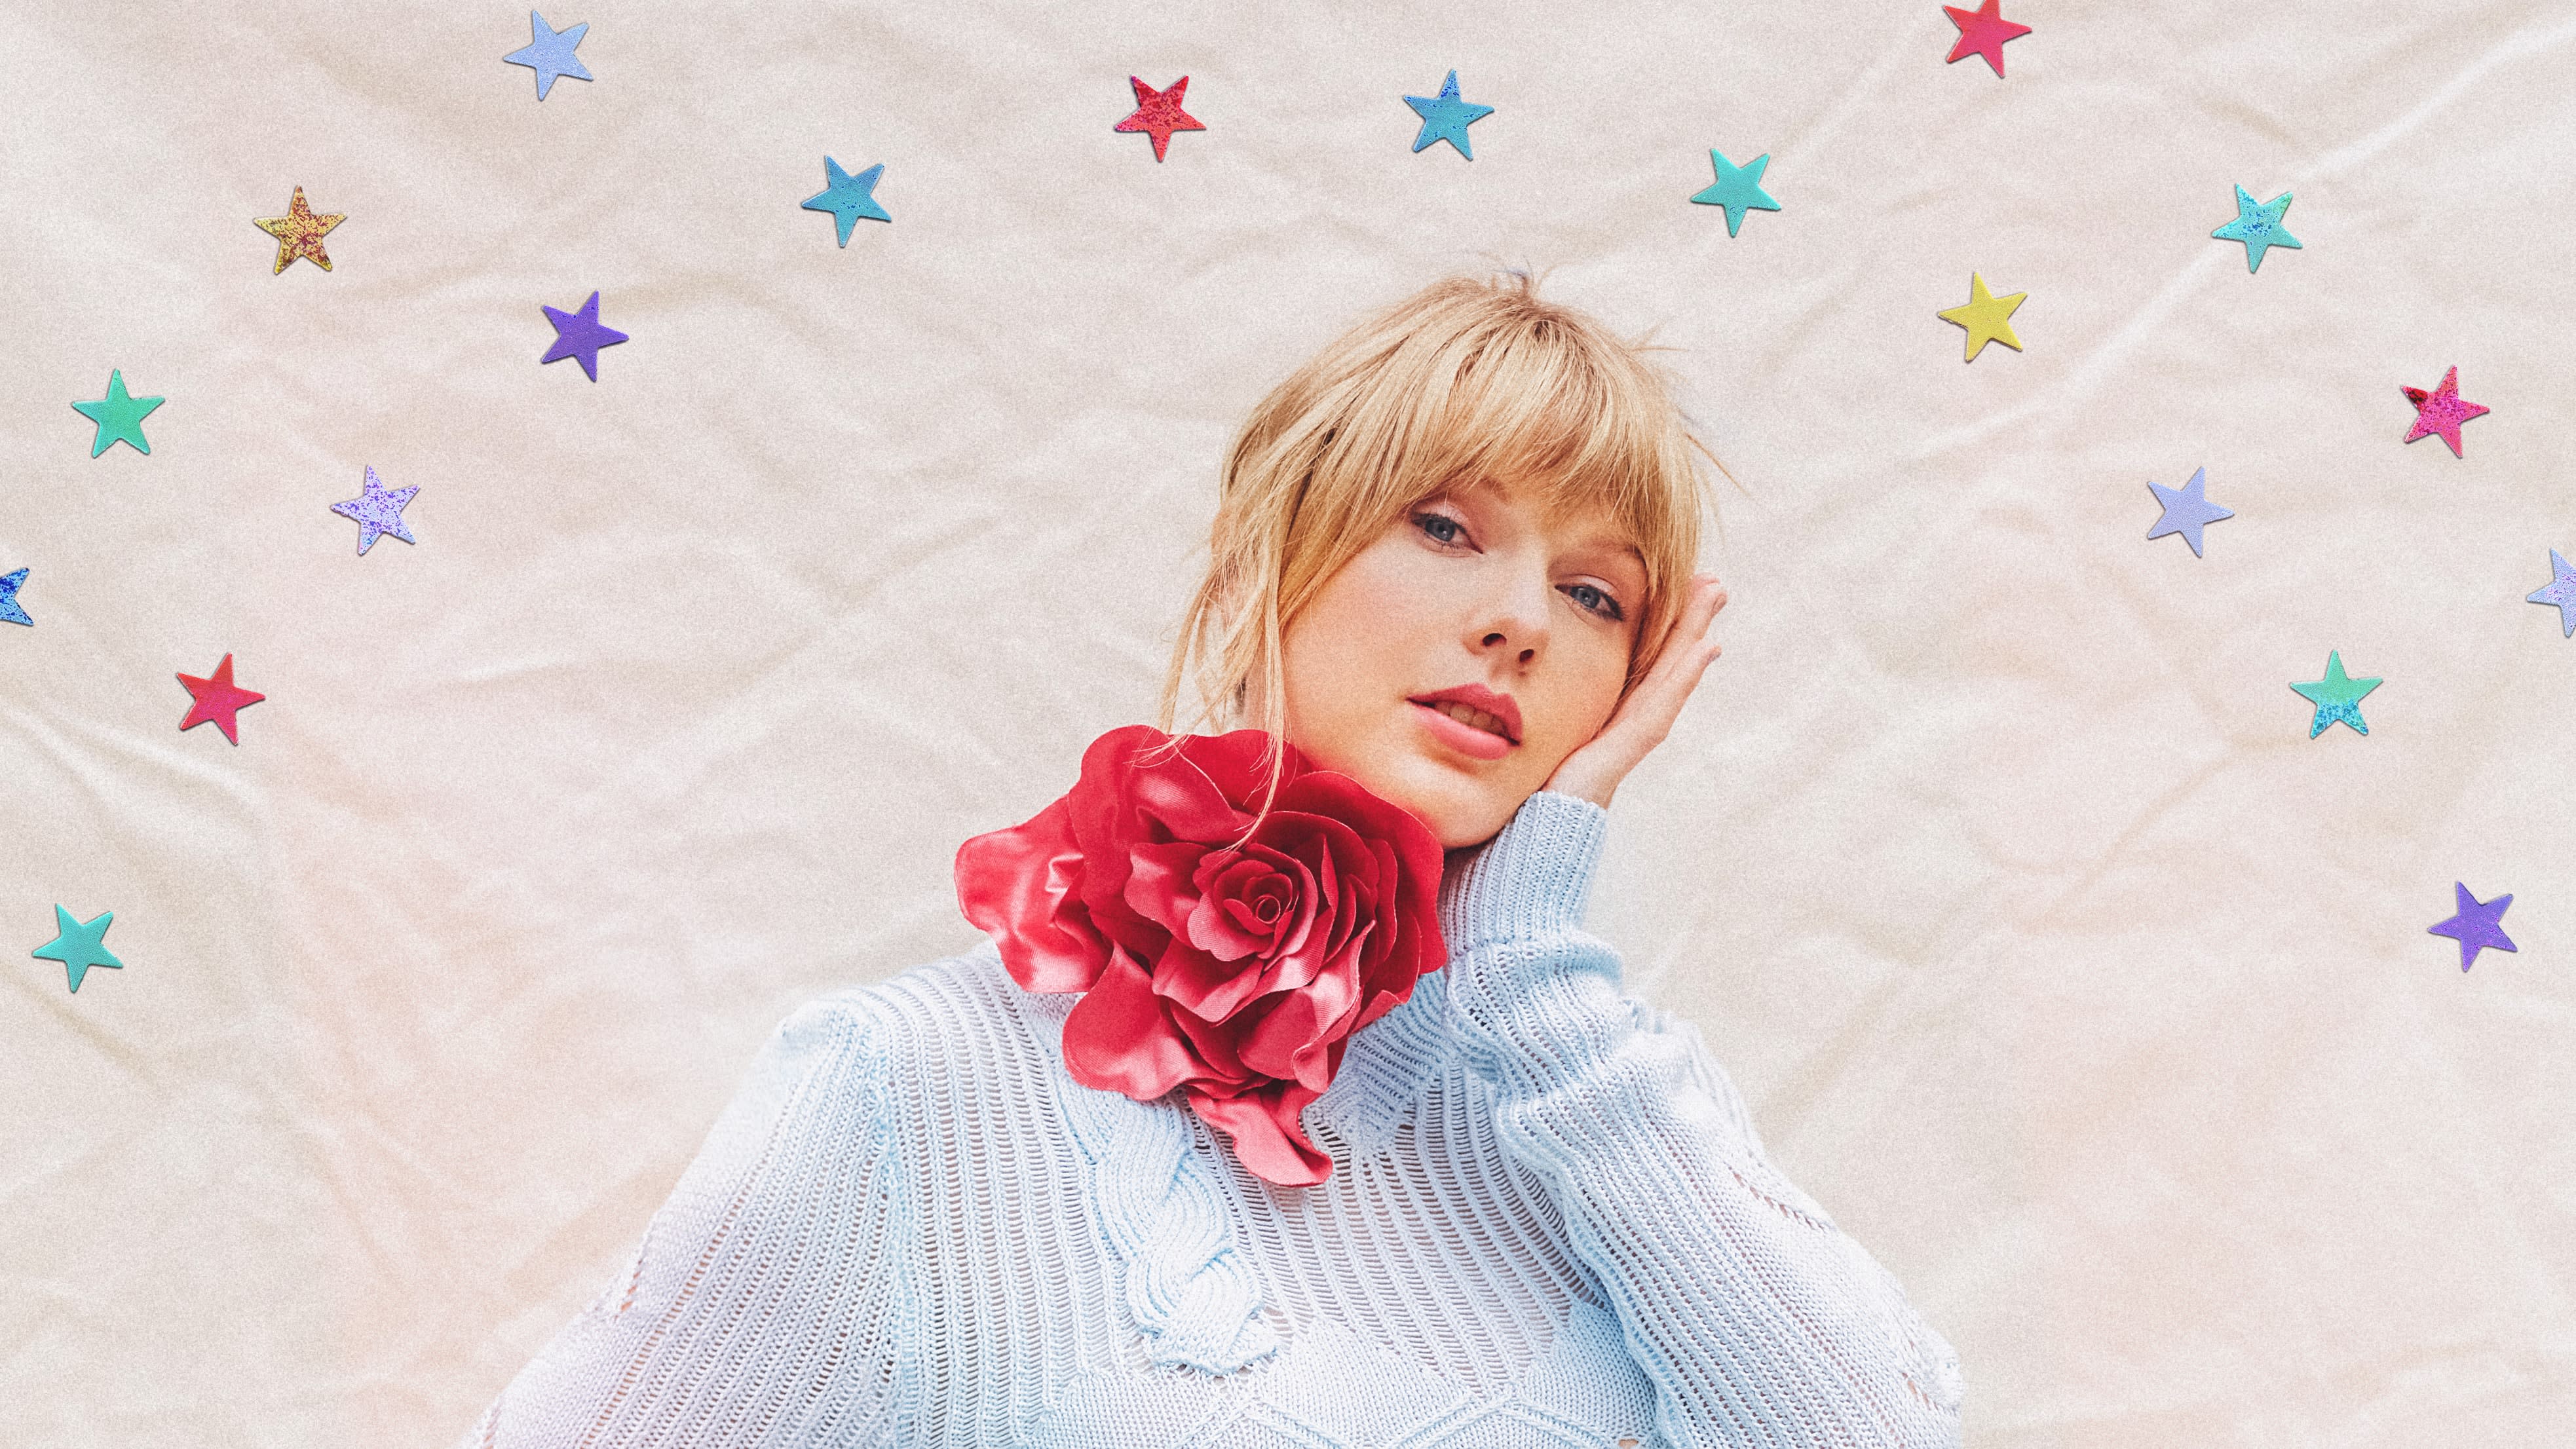 Taylor Swift releases new song and music video